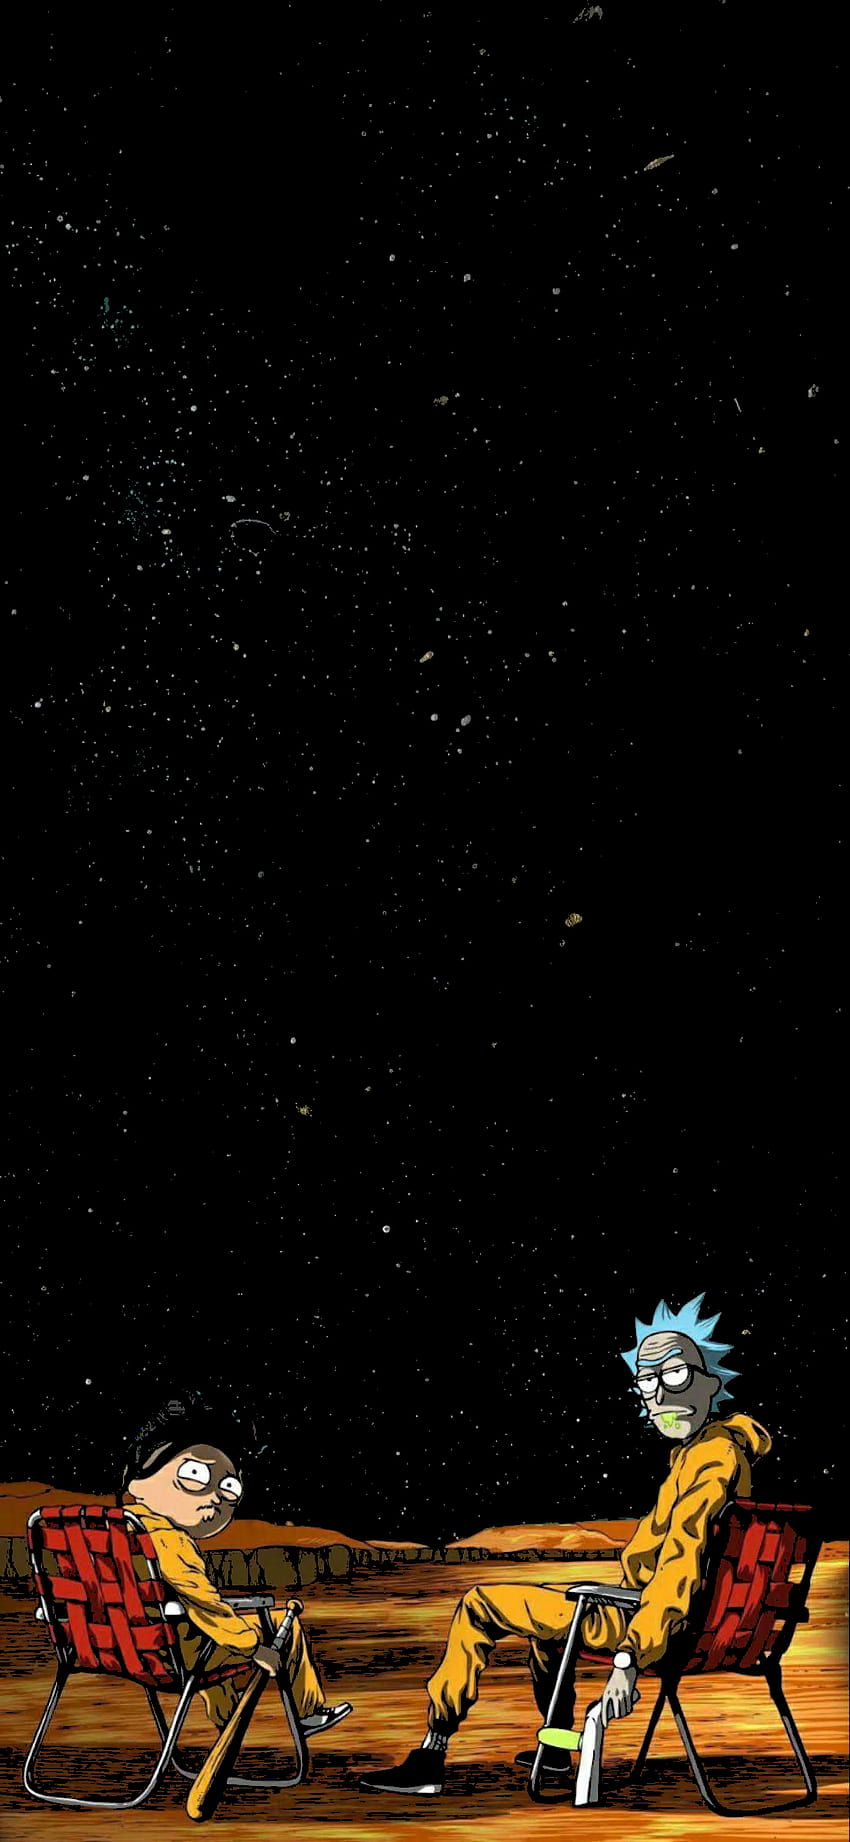 Wallpaper for phone - Rick and Morty, HeroScreen Wallpapers